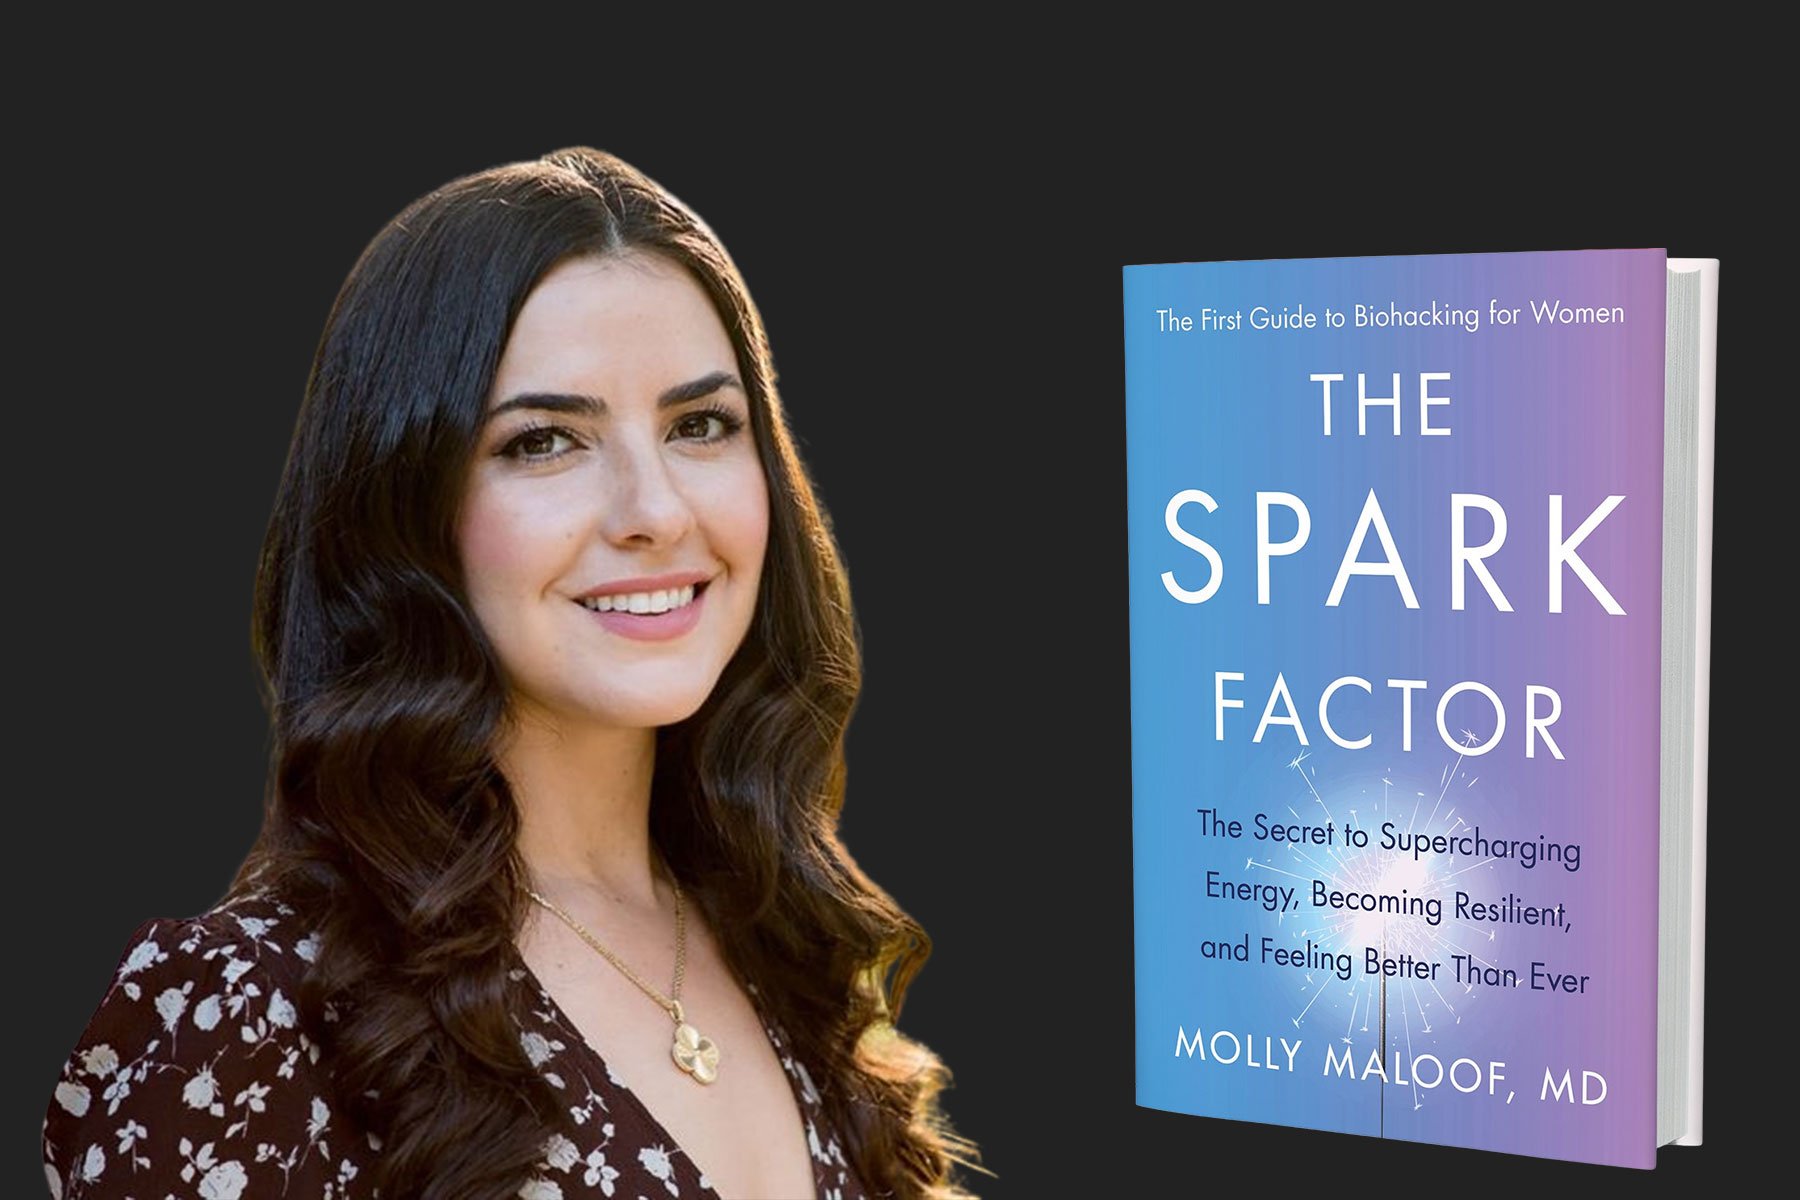 Book Excerpt: Dr. Molly Maloof on why energy is key to health